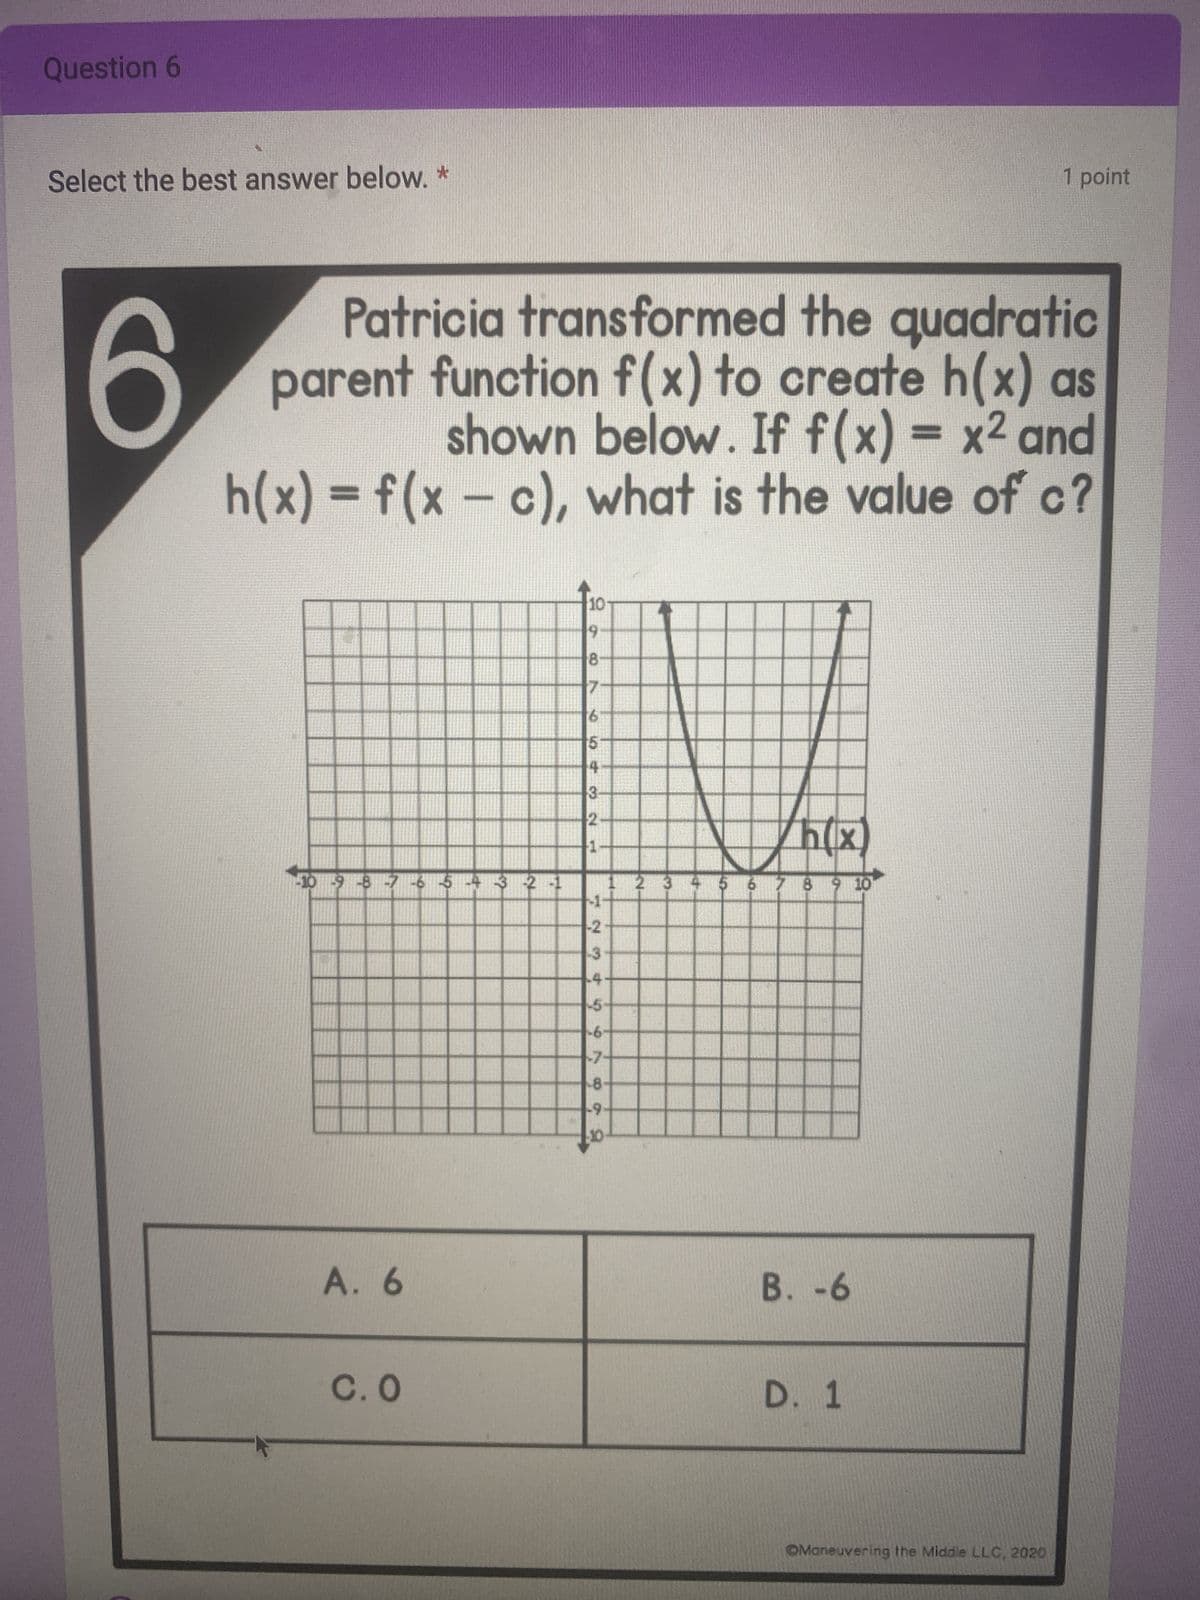 Question 6
Select the best answer below. *
O
Patricia transformed the quadratic
parent function f(x) to create h(x) as
shown below. If f(x) = x² and
h(x) = f(x — c), what is the value of c?
10 9 8 7 -6 5-4 3 2 1
A. 6
C.0
10
19
8-
7
6
5
4
3
2-
1
7234567
-2
-3
-4
1 2 3
-5-
-6-
-7.
-8-
-9-
h(x)
5 6 7 8 9 10
B. -6
D. 1
11
1 point
OManeuvering the Middle LLC, 2020